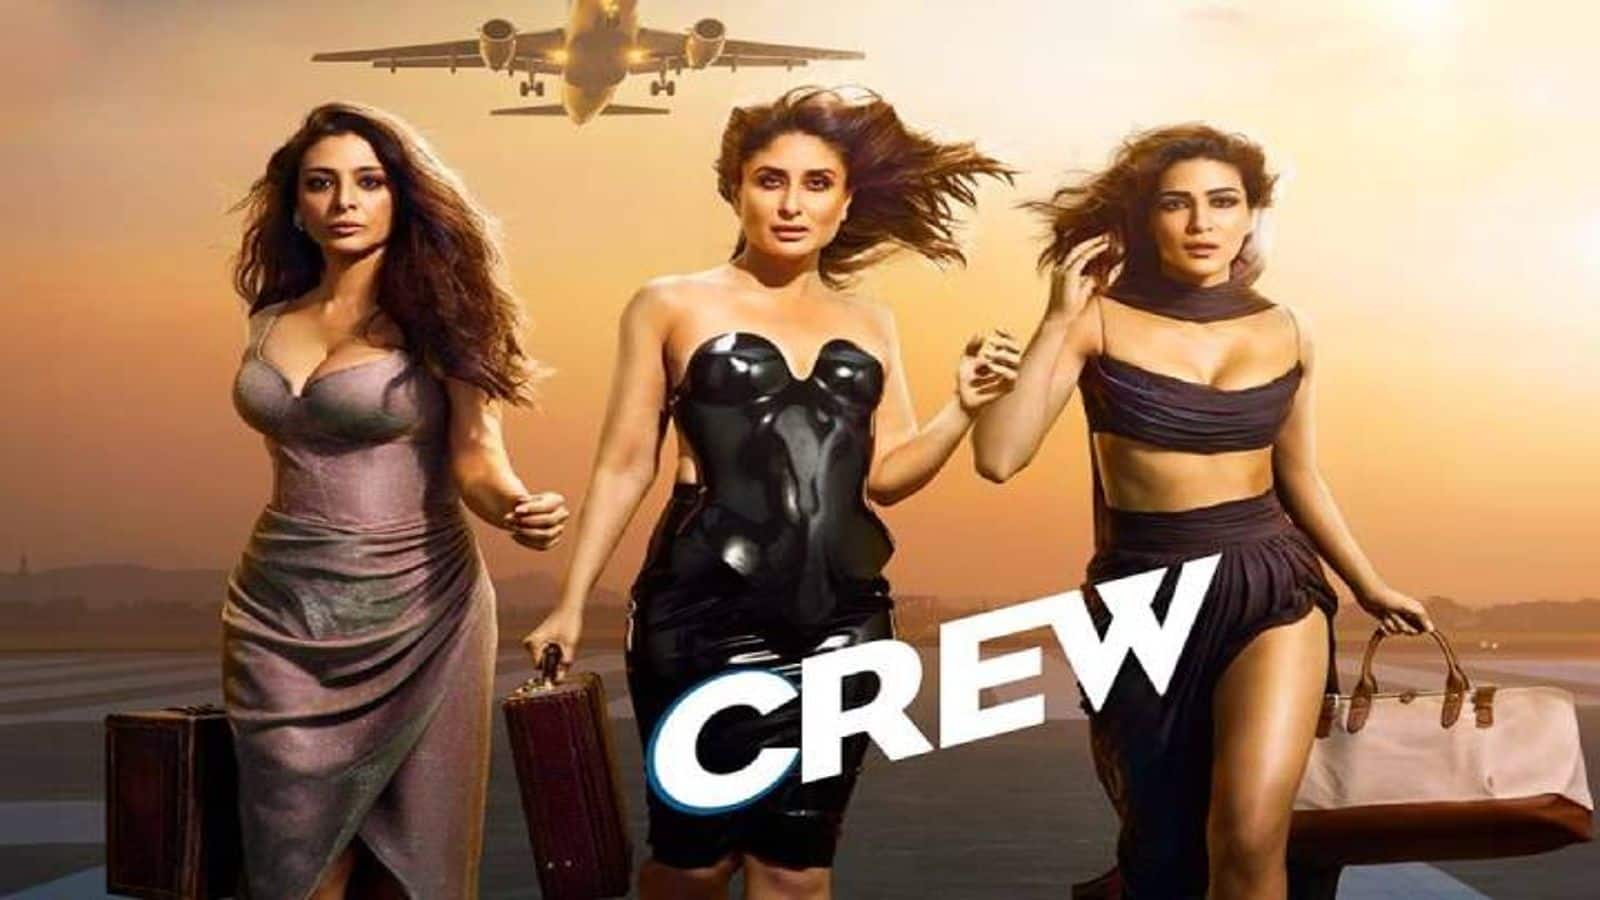 'Crew' hits ₹71.31cr mark in 20 days at box office